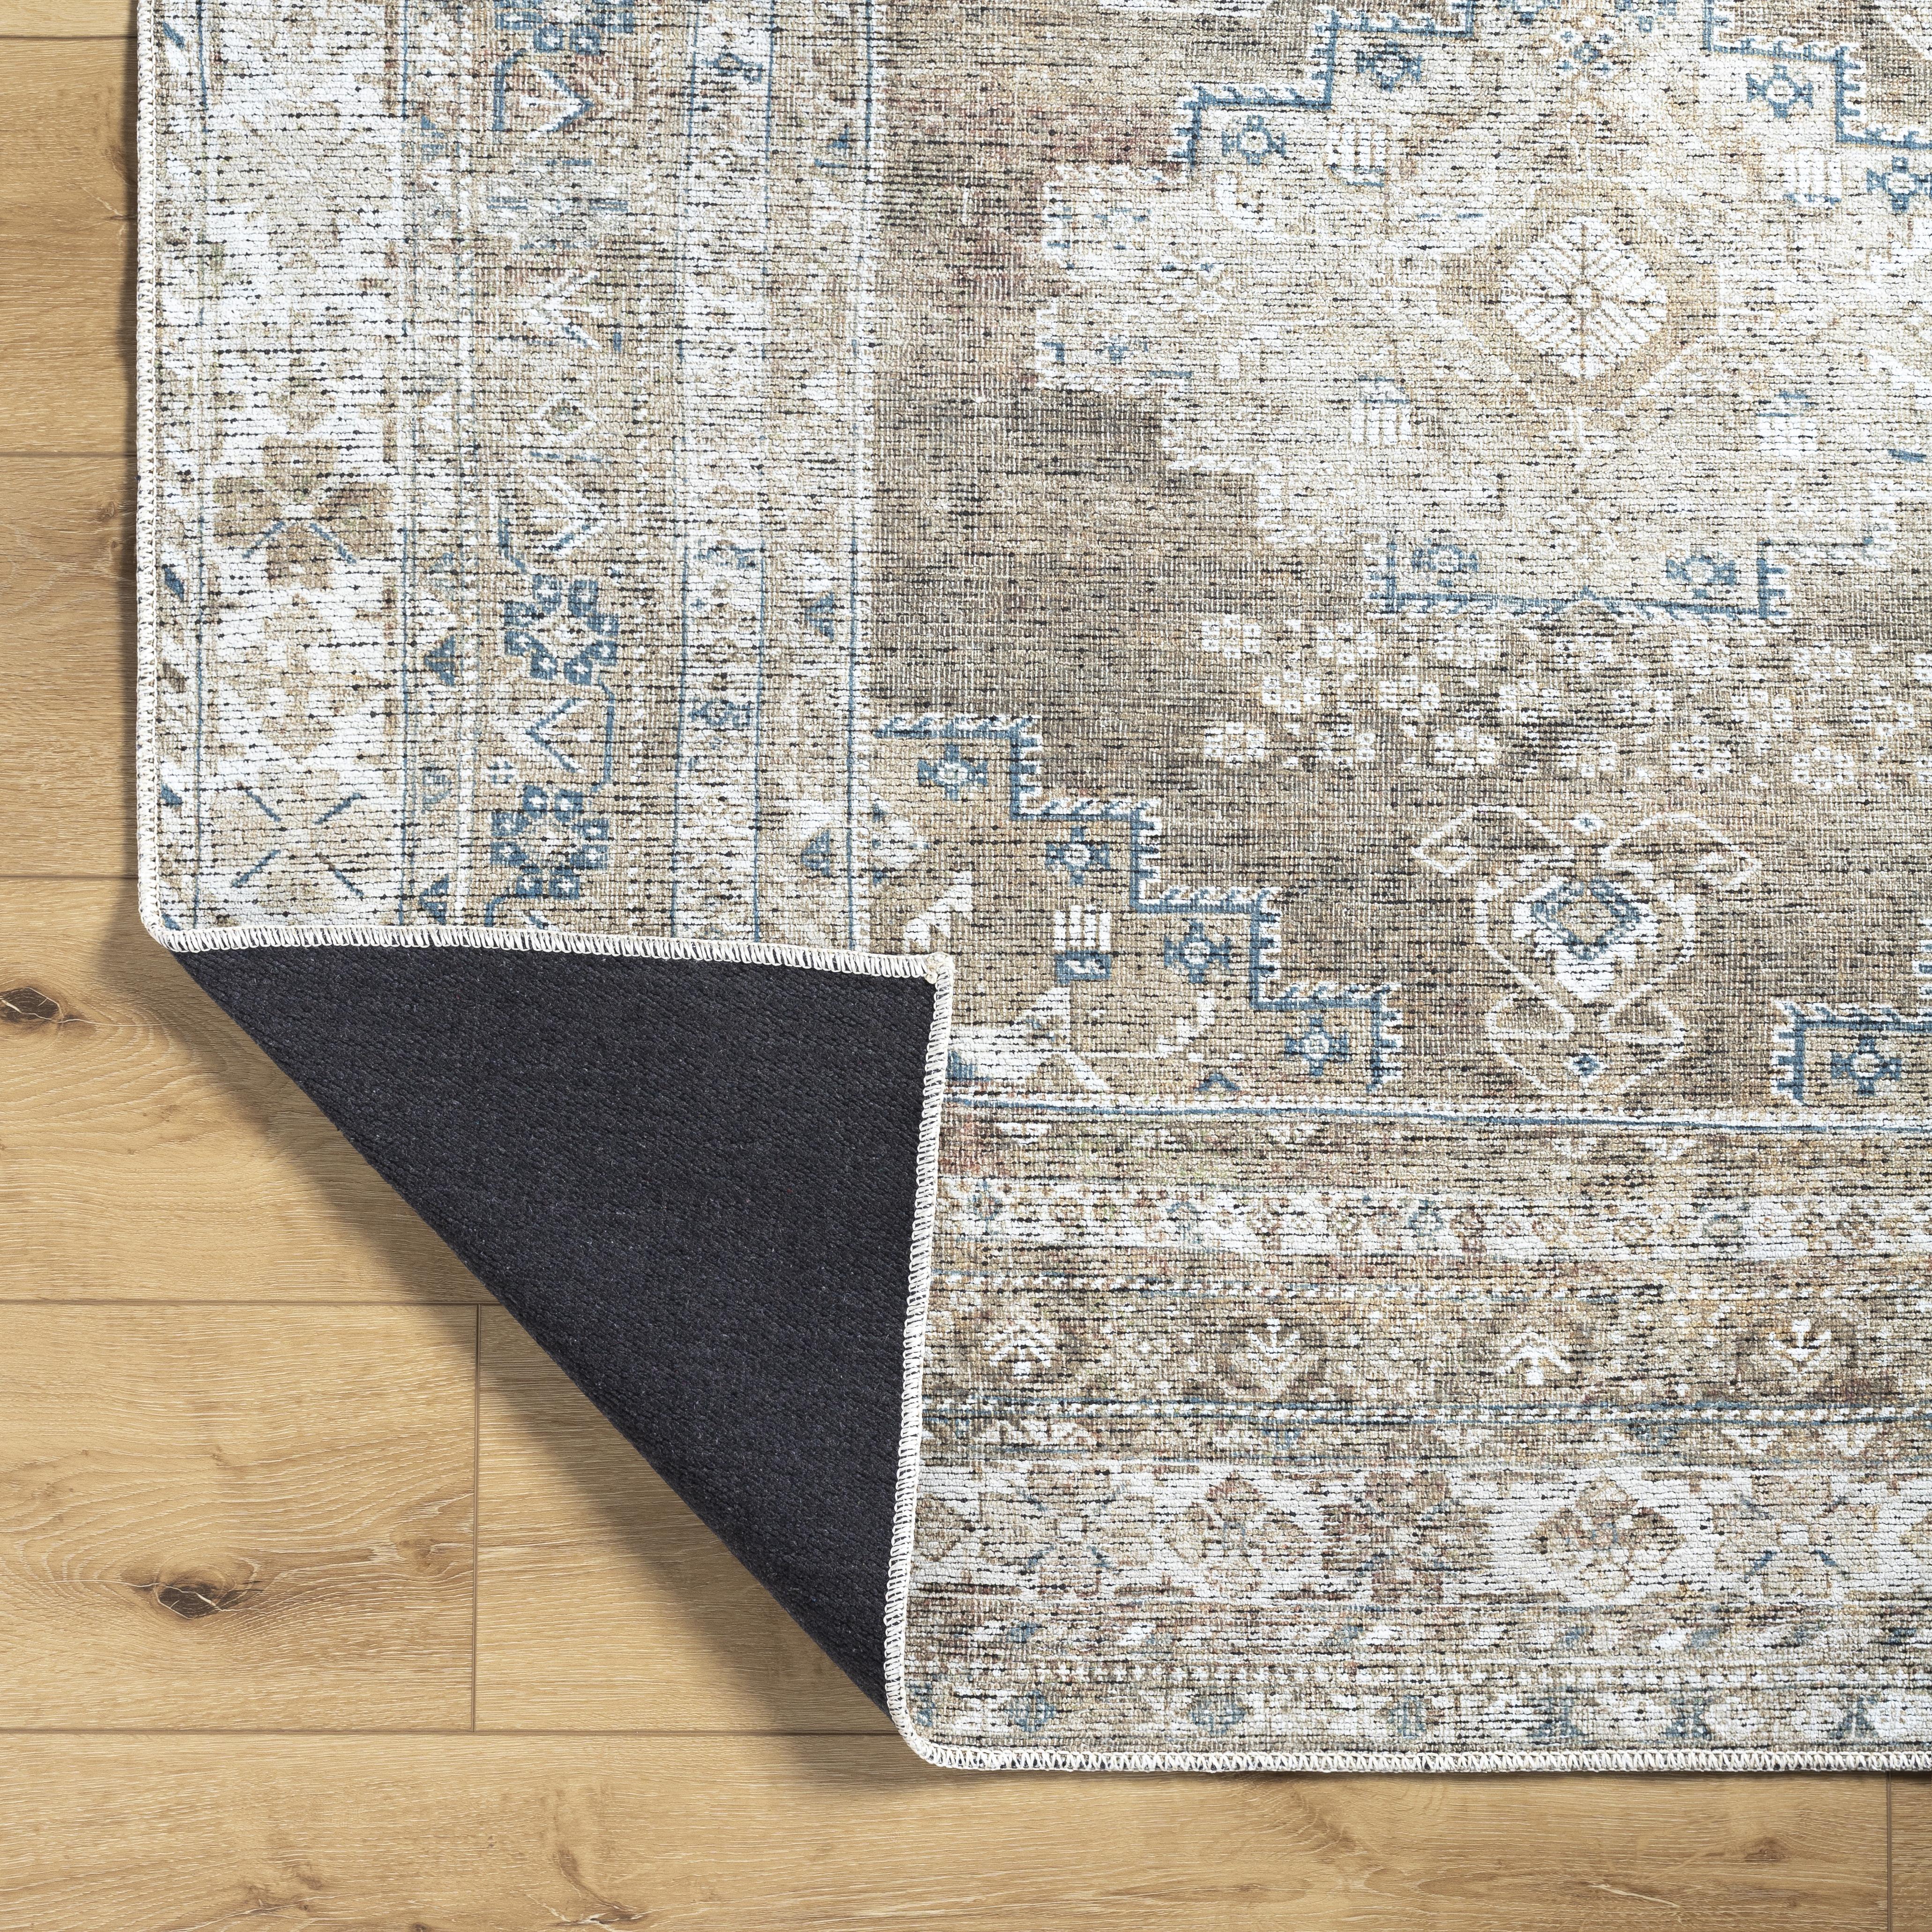 Better Homes & Gardens Geo Medallion Washable Non-Skid Area Rug, Sage, 5'3" x 7' - image 2 of 6